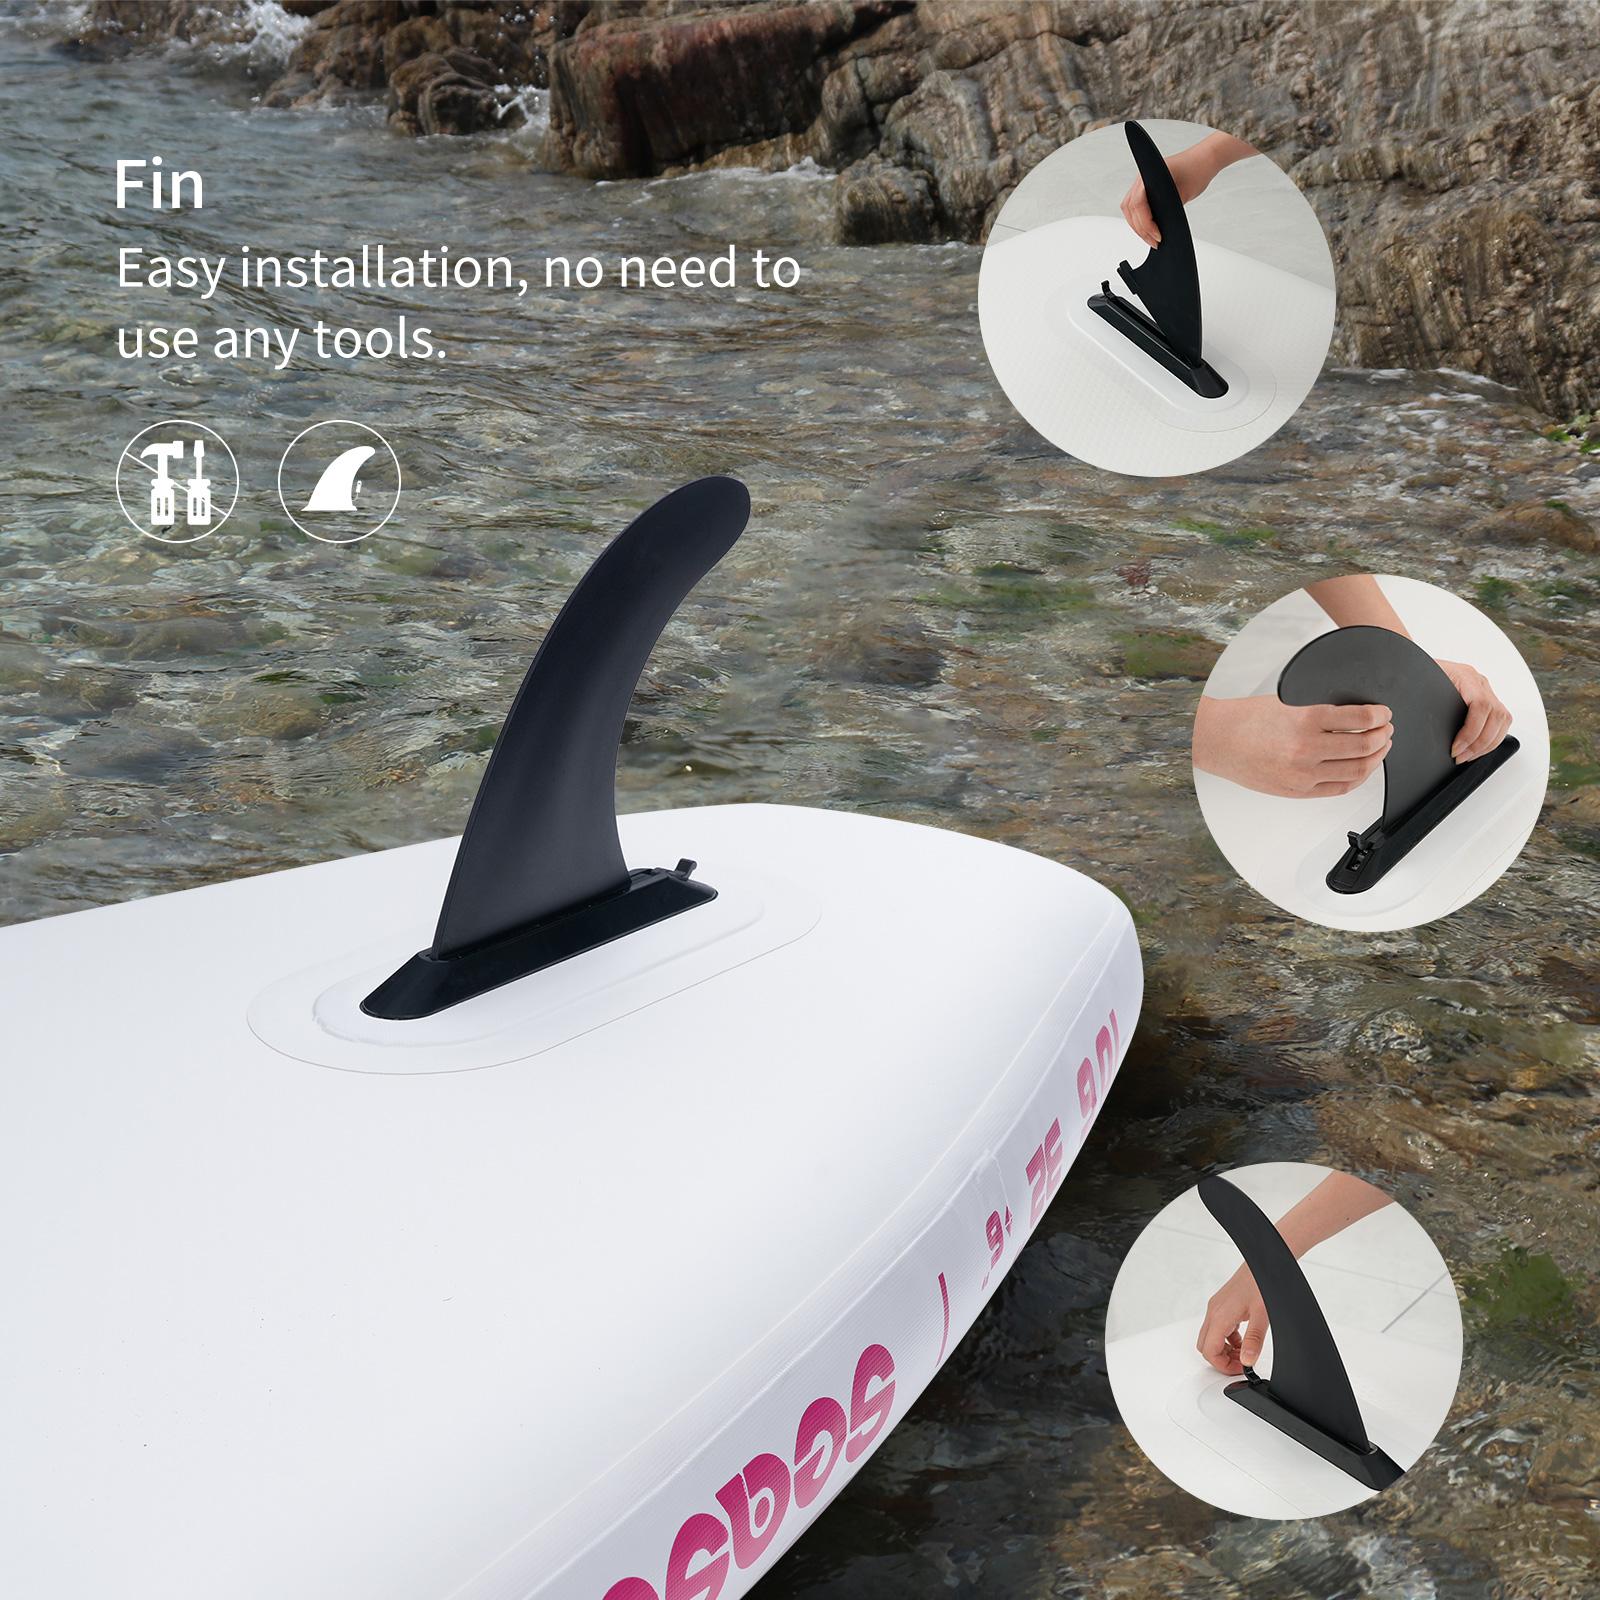  best quality inflatable sup